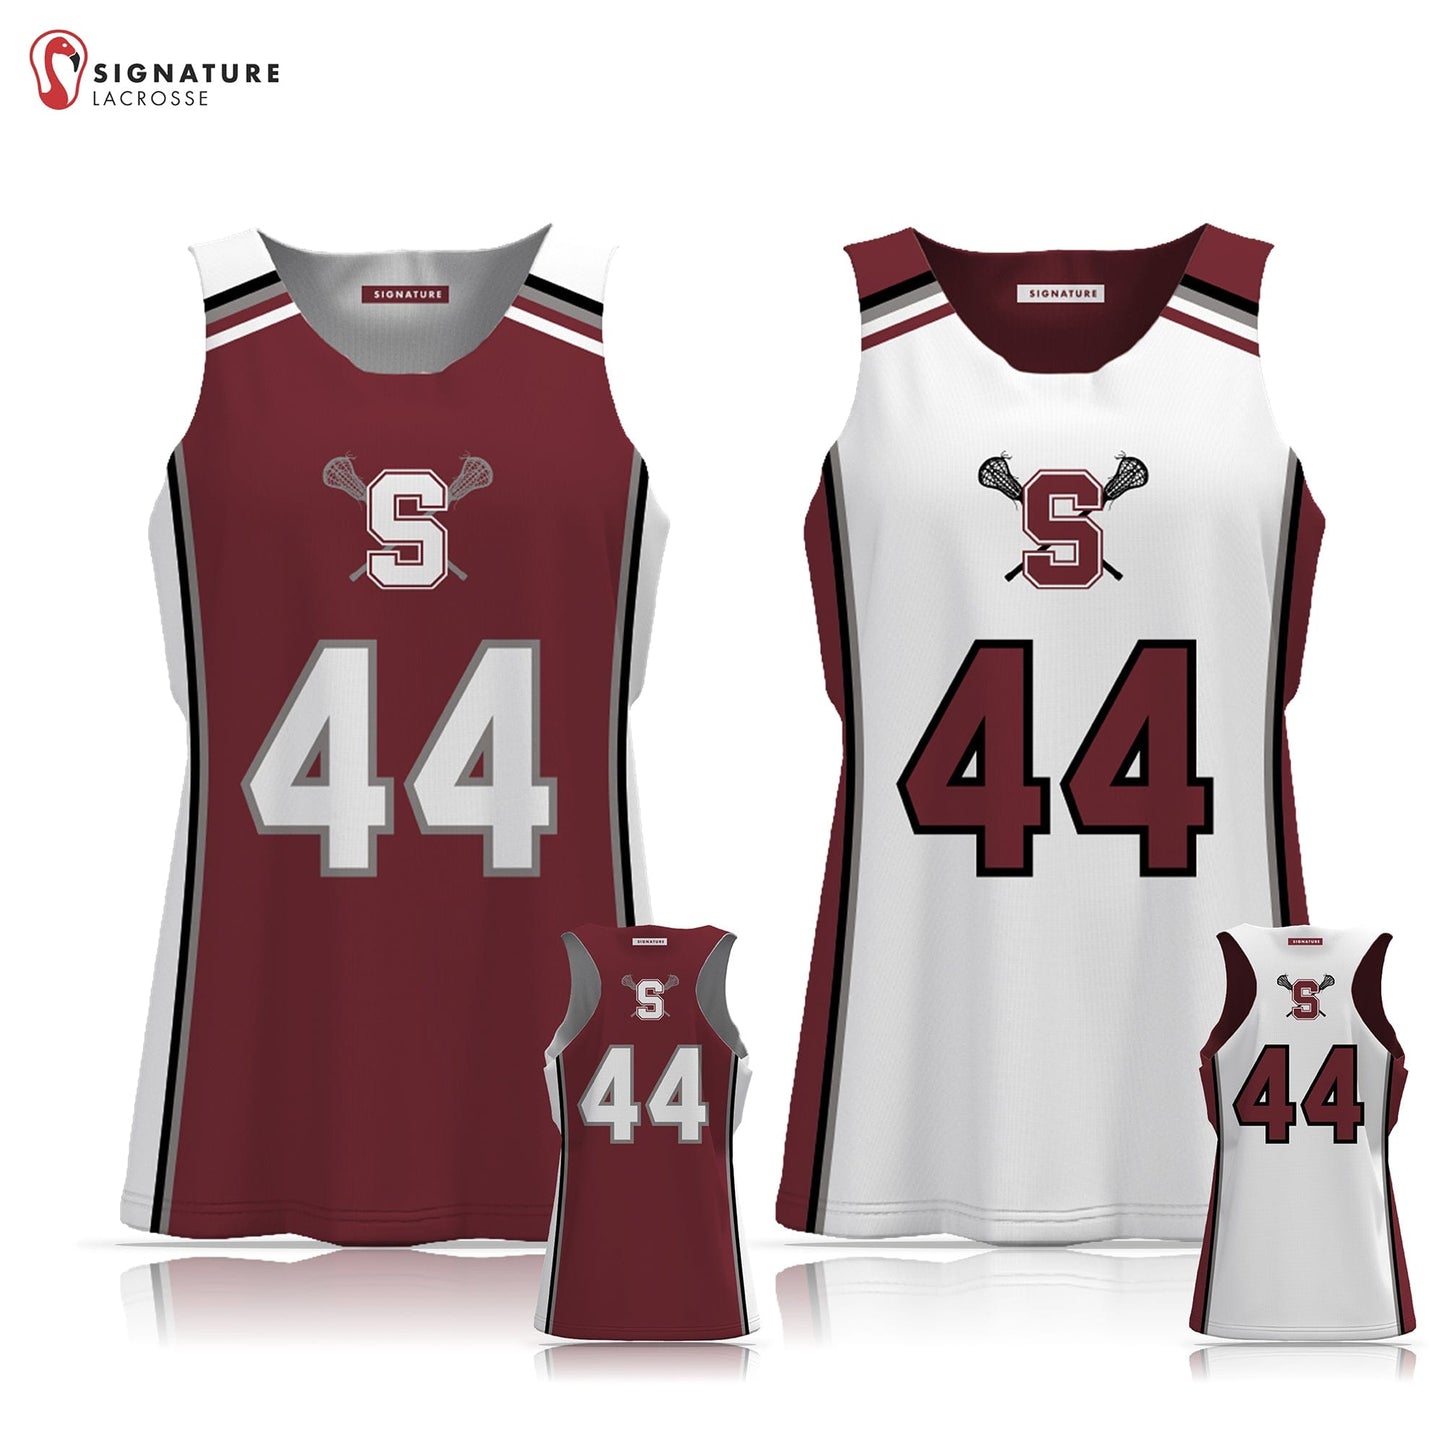 State College Women's Player Reversible Game Pinnie: 3-4 Signature Lacrosse